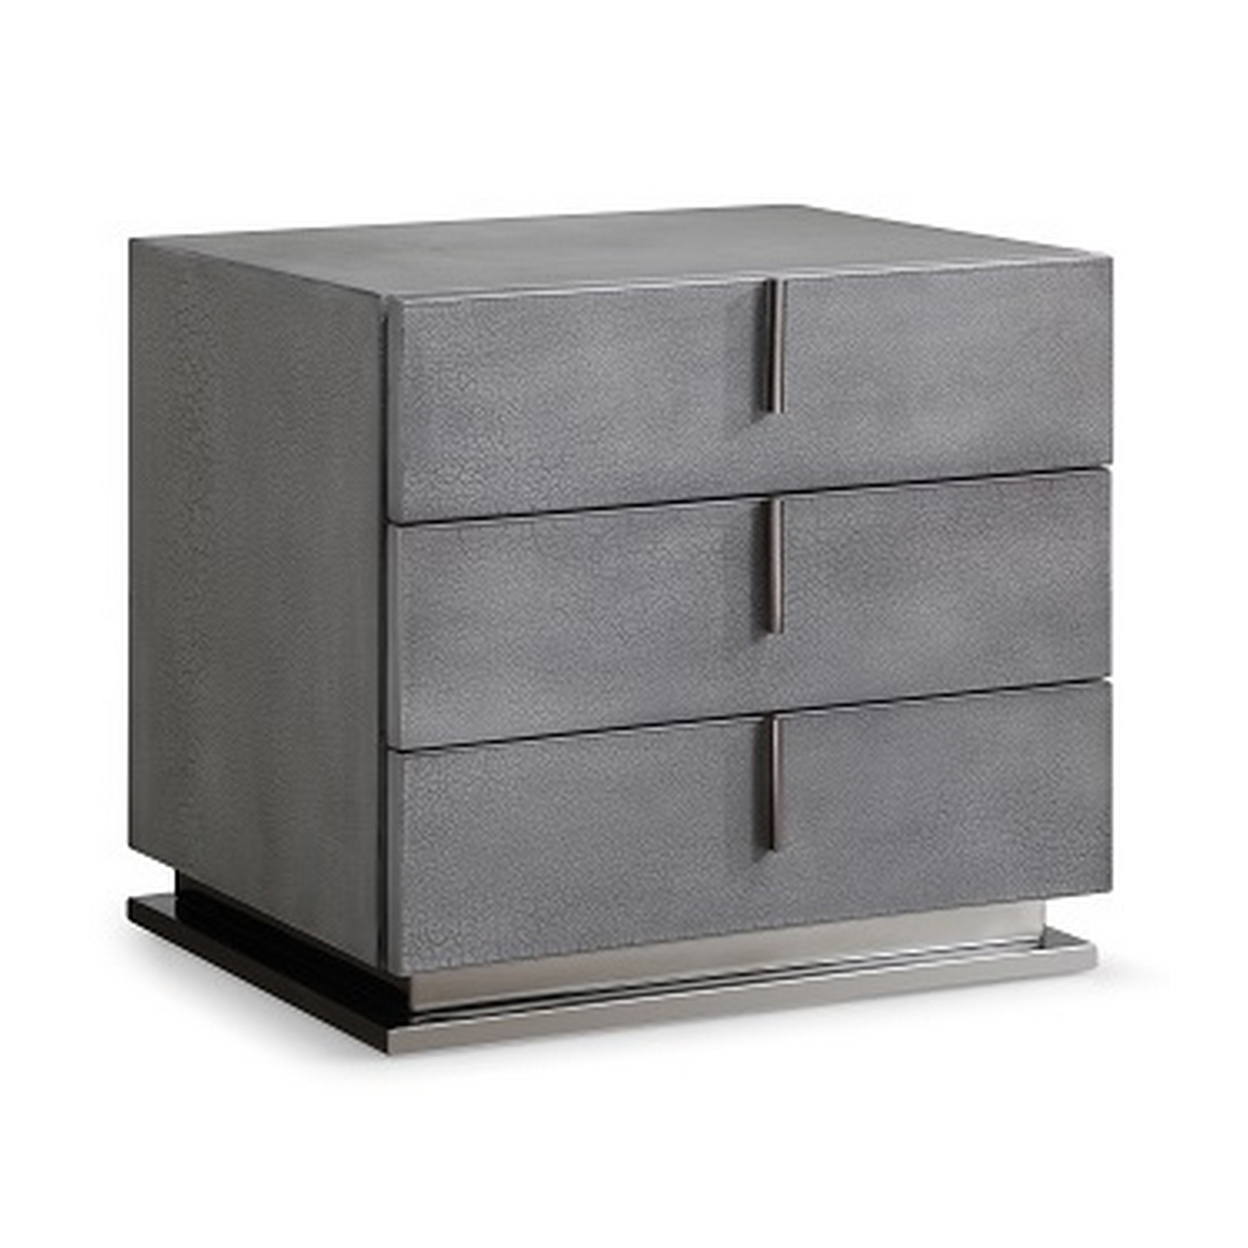 Cid Jely 24 Inch Nightstand, 3 Drawers, Crackled Lacquer Texture, Gray- Saltoro Sherpi